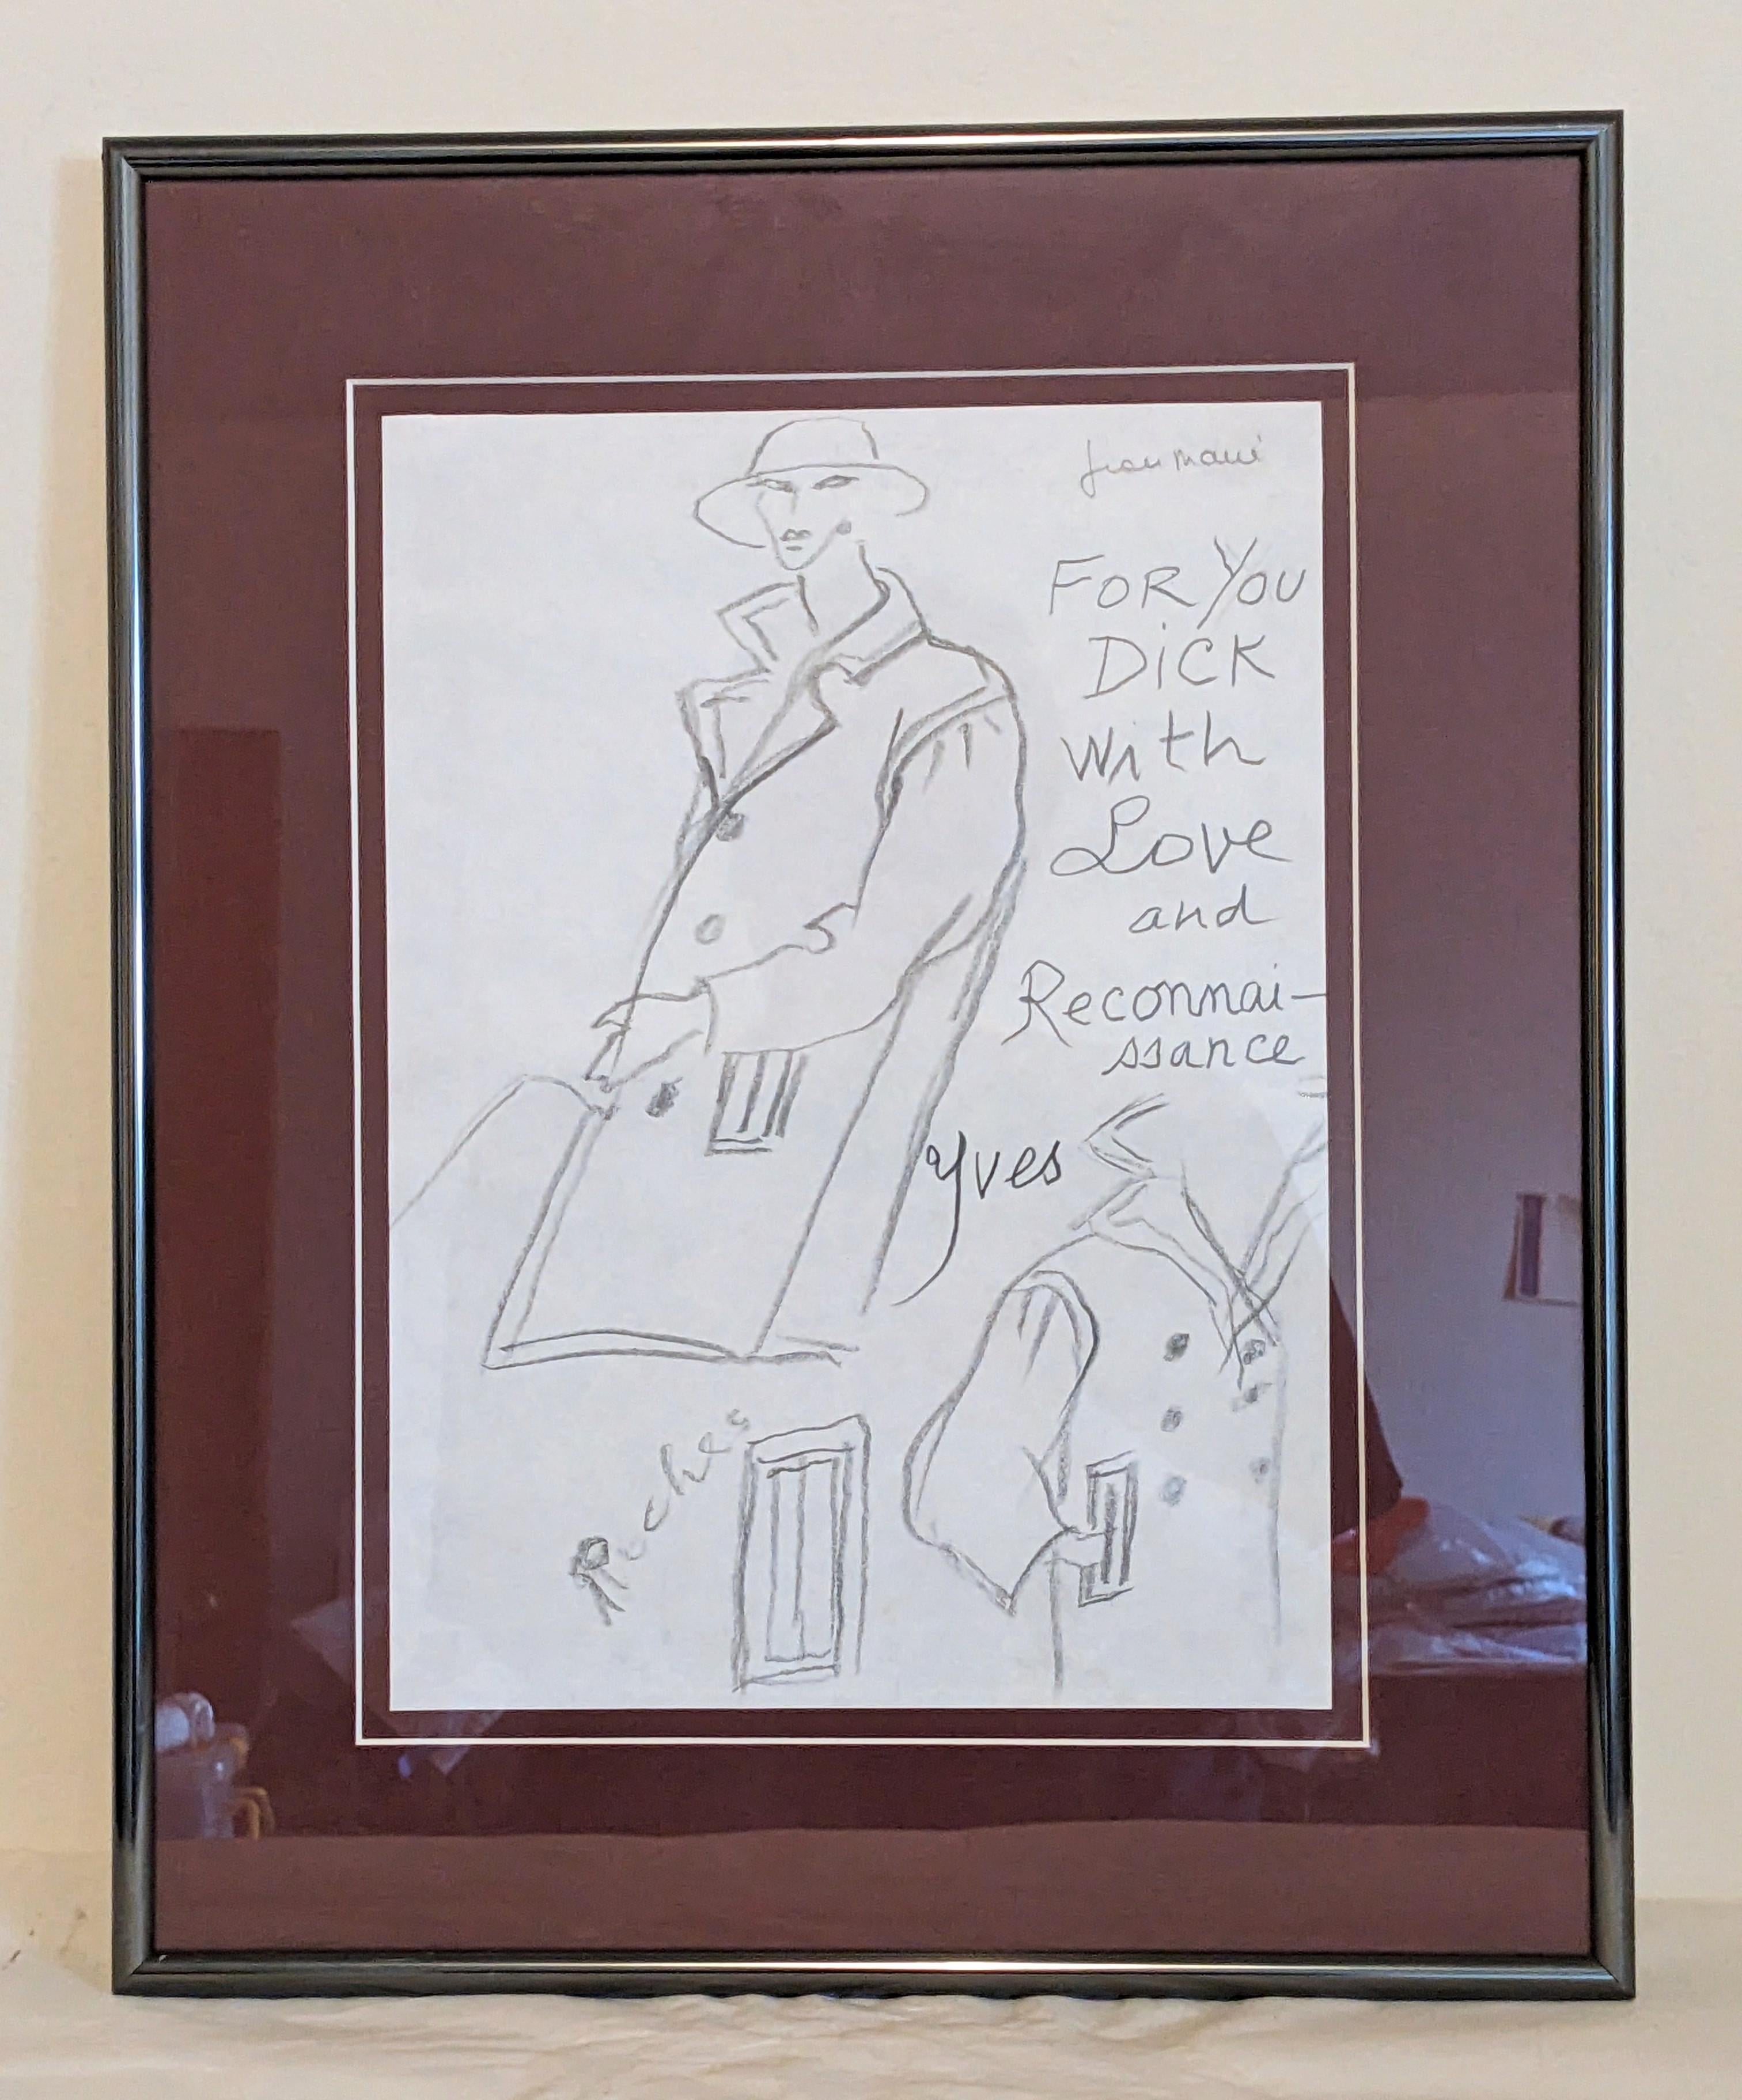 Yves Saint Laurent Original Pencil Croquis In Good Condition For Sale In Riverdale, NY